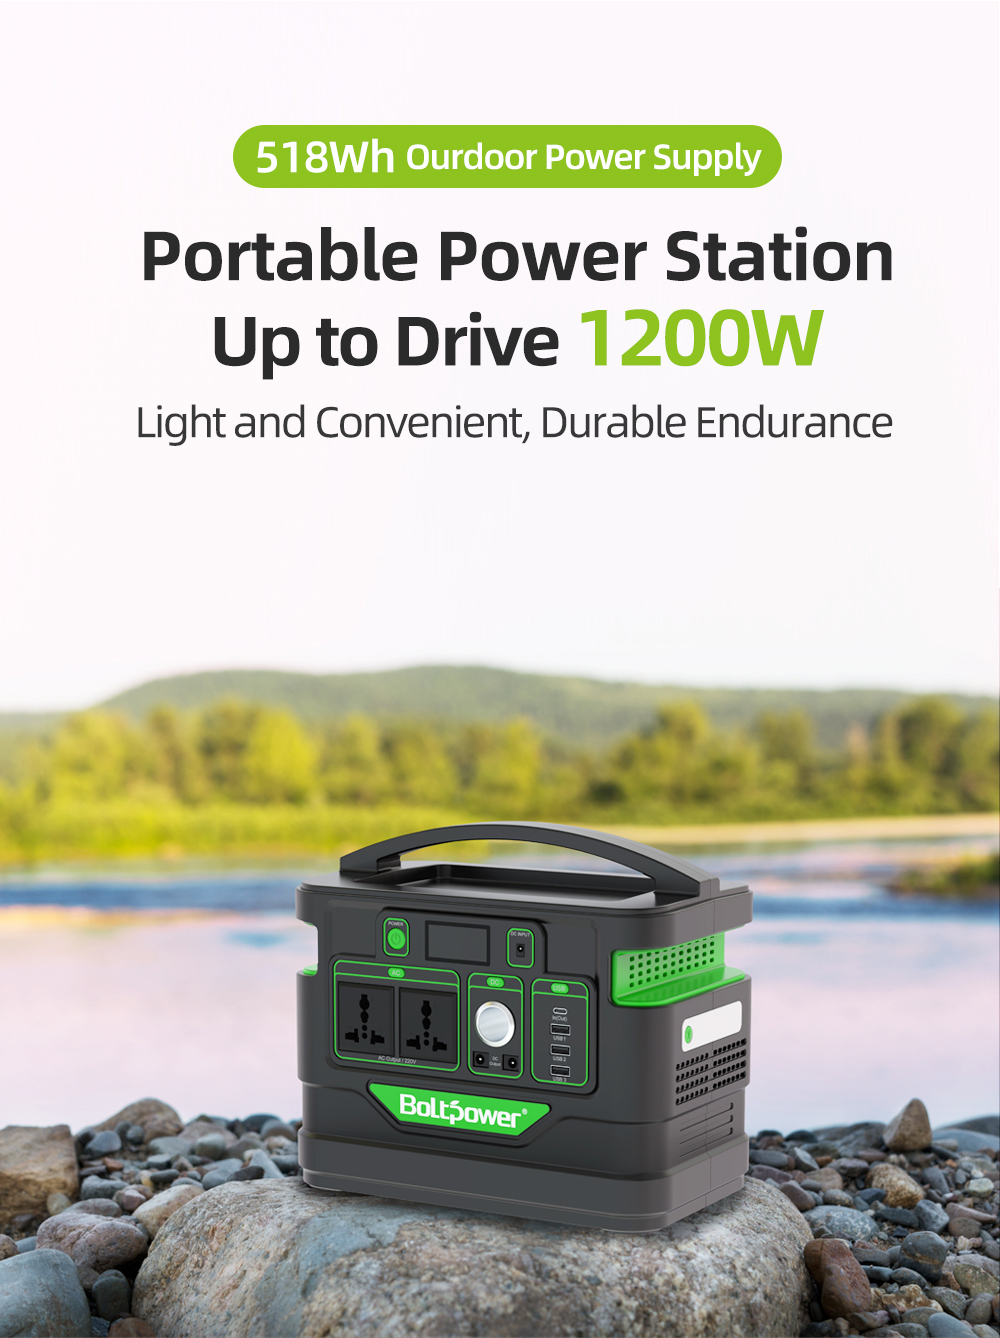 500W 518Wh Lithium Power Station